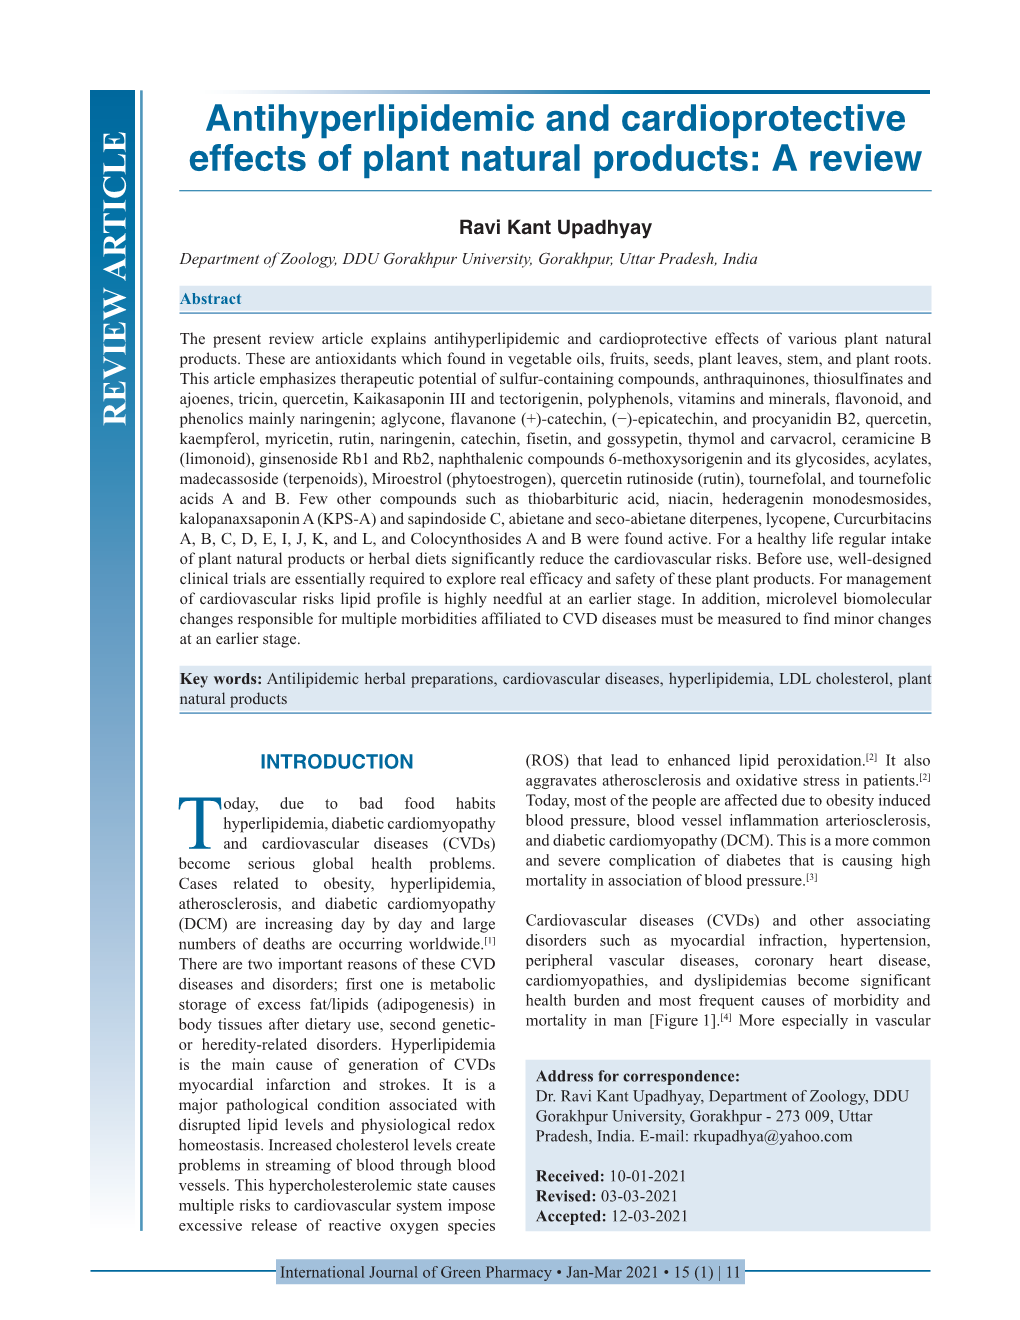 Antihyperlipidemic and Cardioprotective Effects of Plant Natural Products: a Review